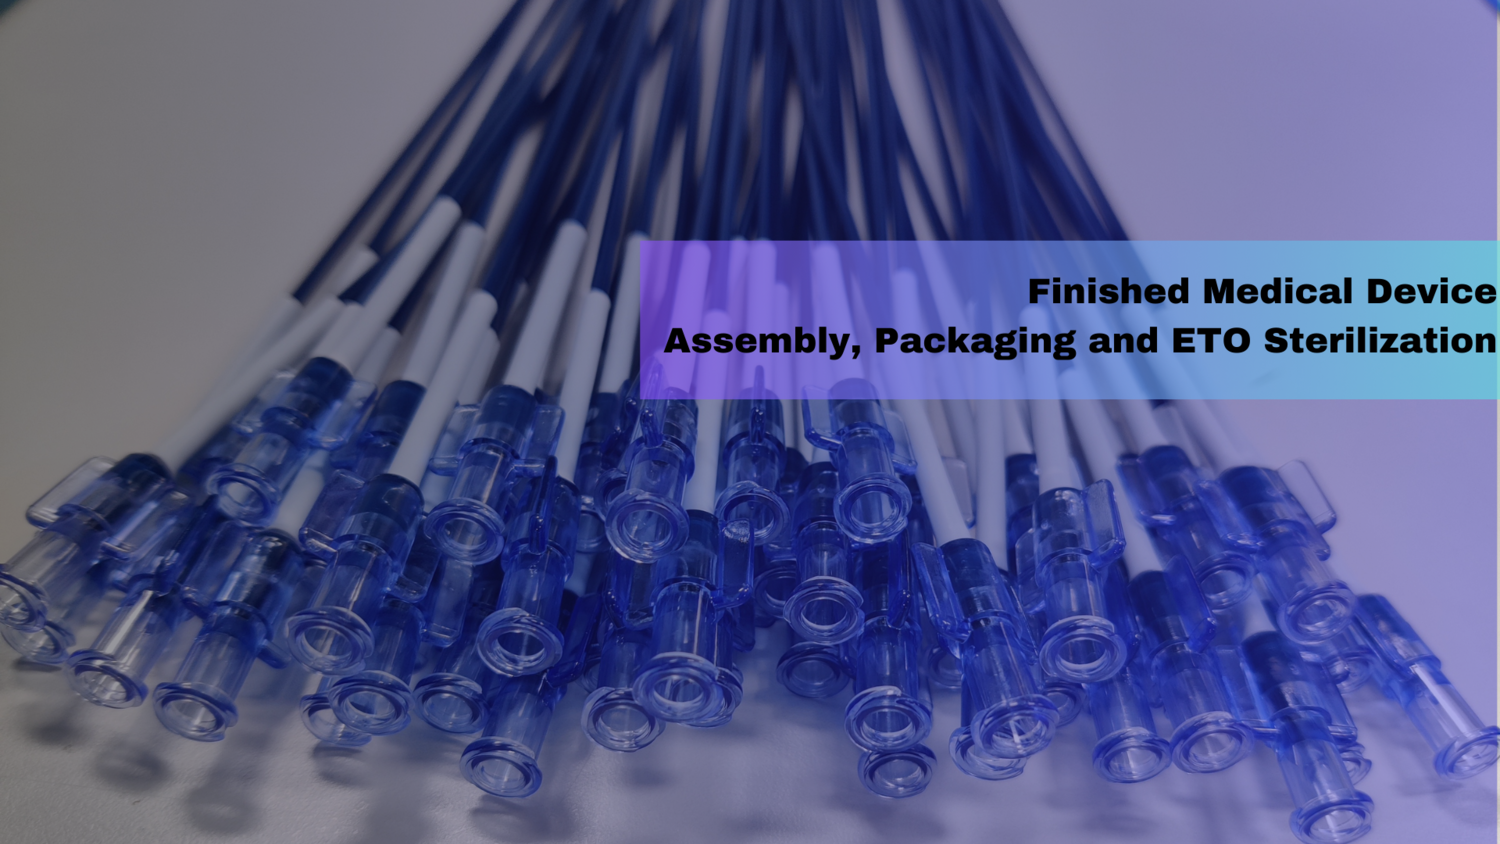 Finished Medical Device Assembly,Packaging and ETO Sterilization (2) (2)